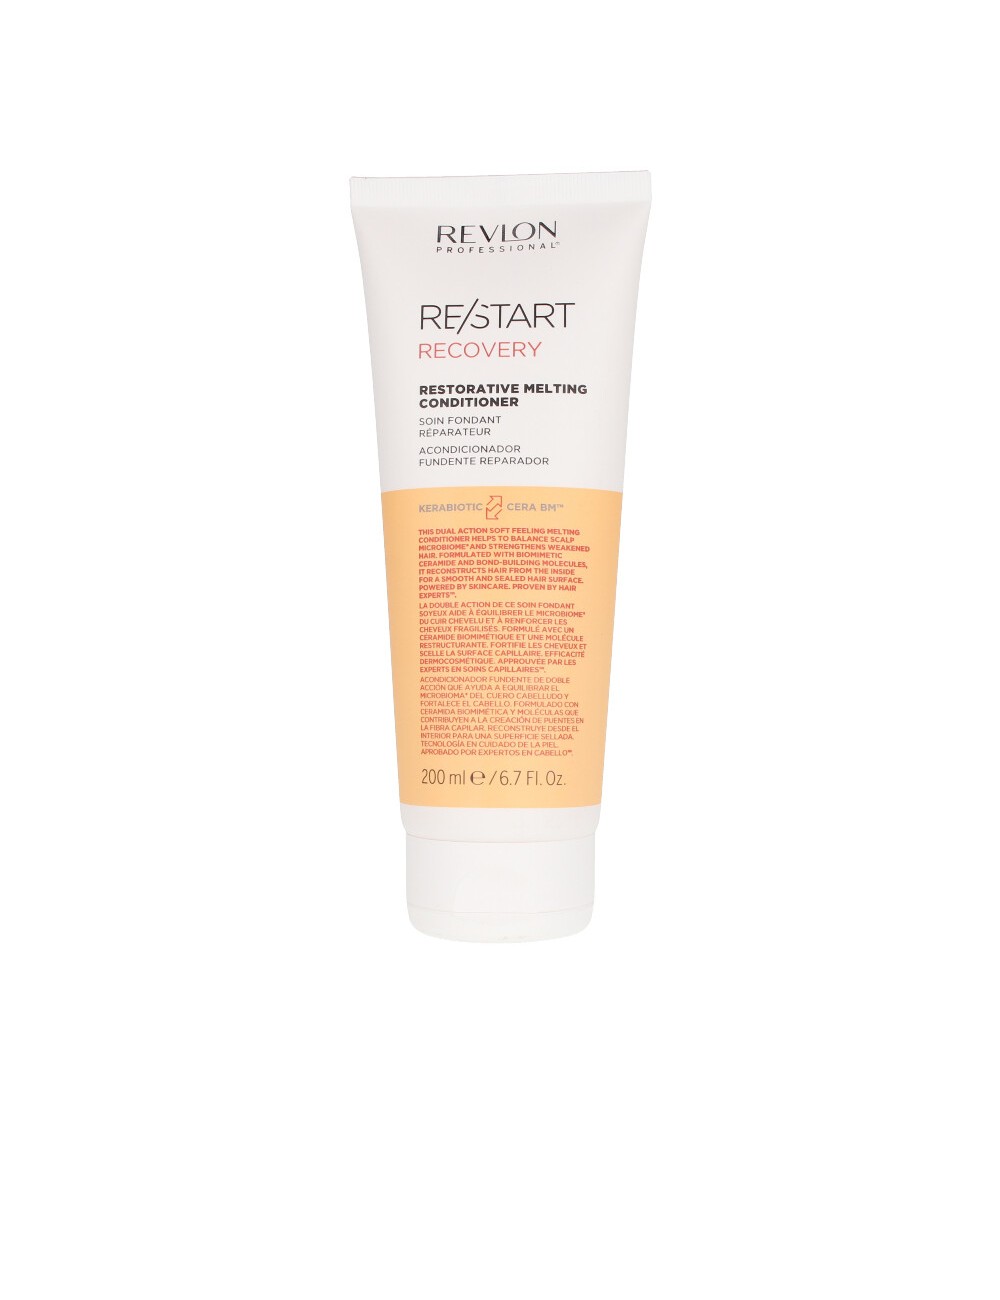 RE-START recovery restorative melting conditioner